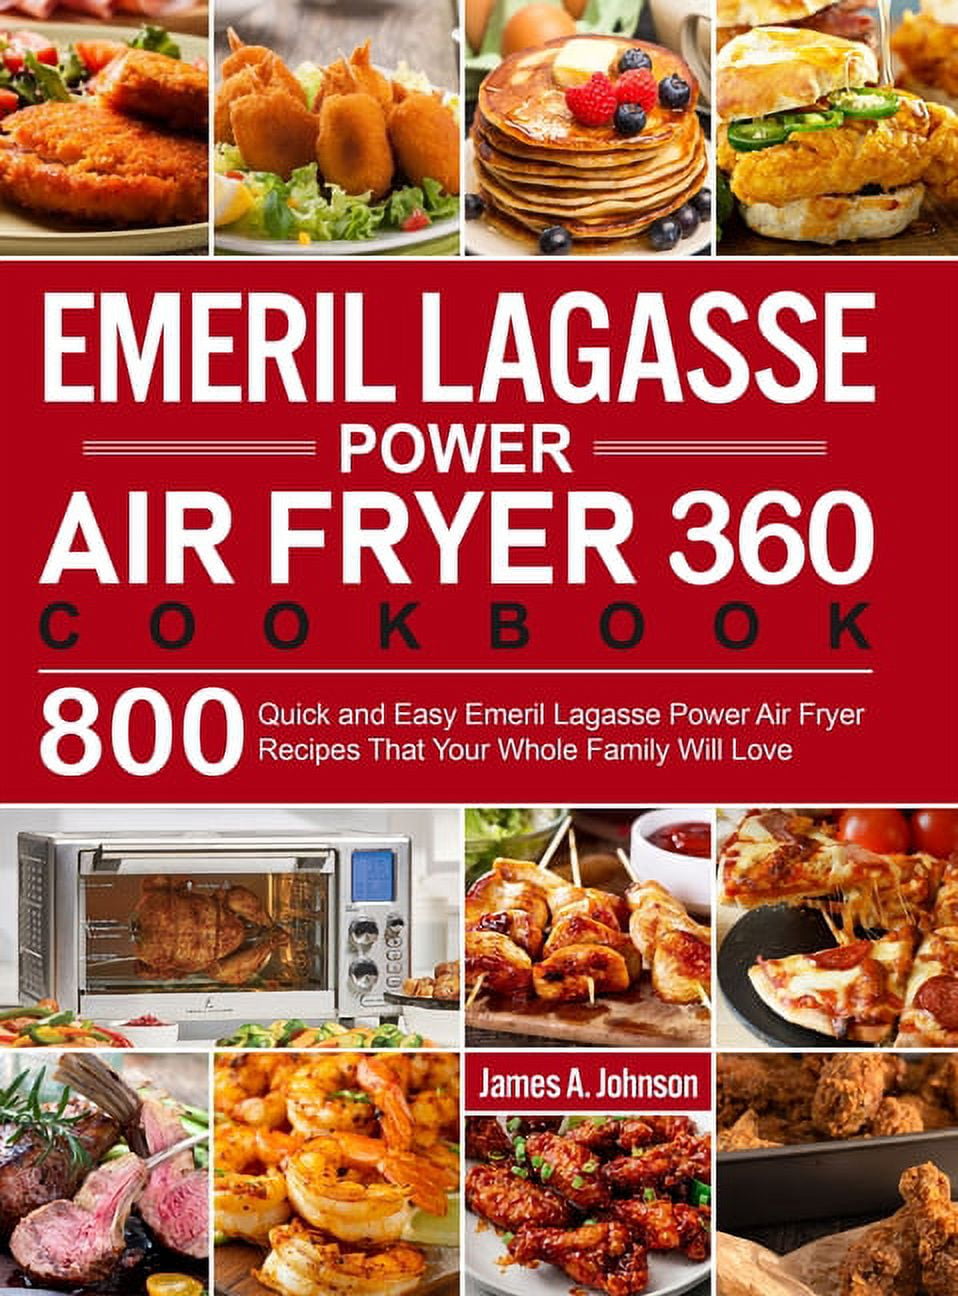 Emeril Lagasse French Door 360 Dual Zone Air Fryer Cookbook: 1500 Days of Easy-to-Follow, Budget-Friendly & Delicious Fryer Recipes to Enjoy with